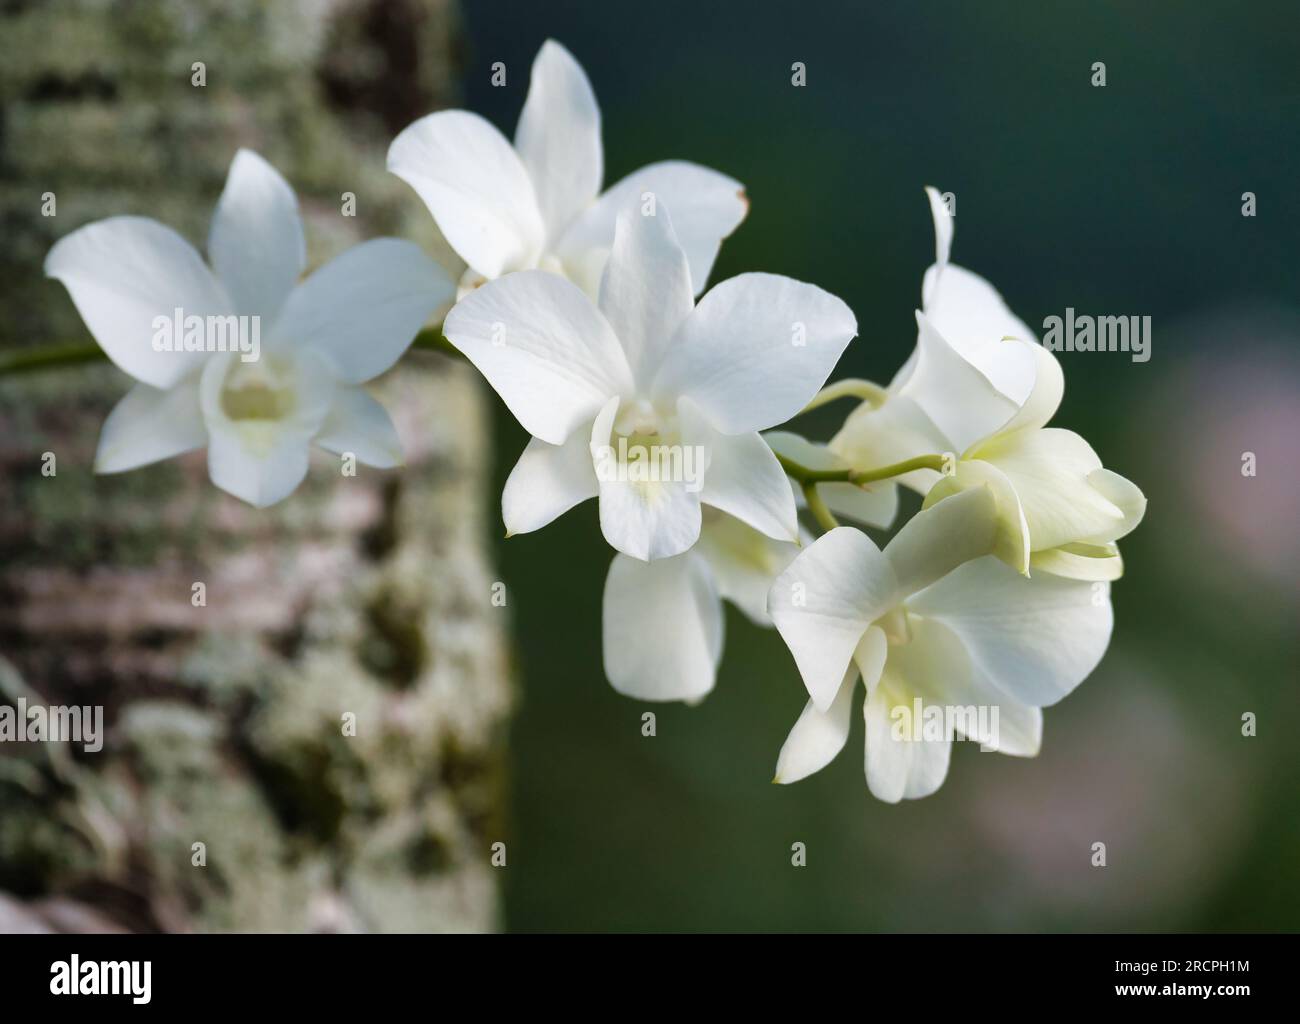 White orchid flower blooming on a plam tree Stock Photo